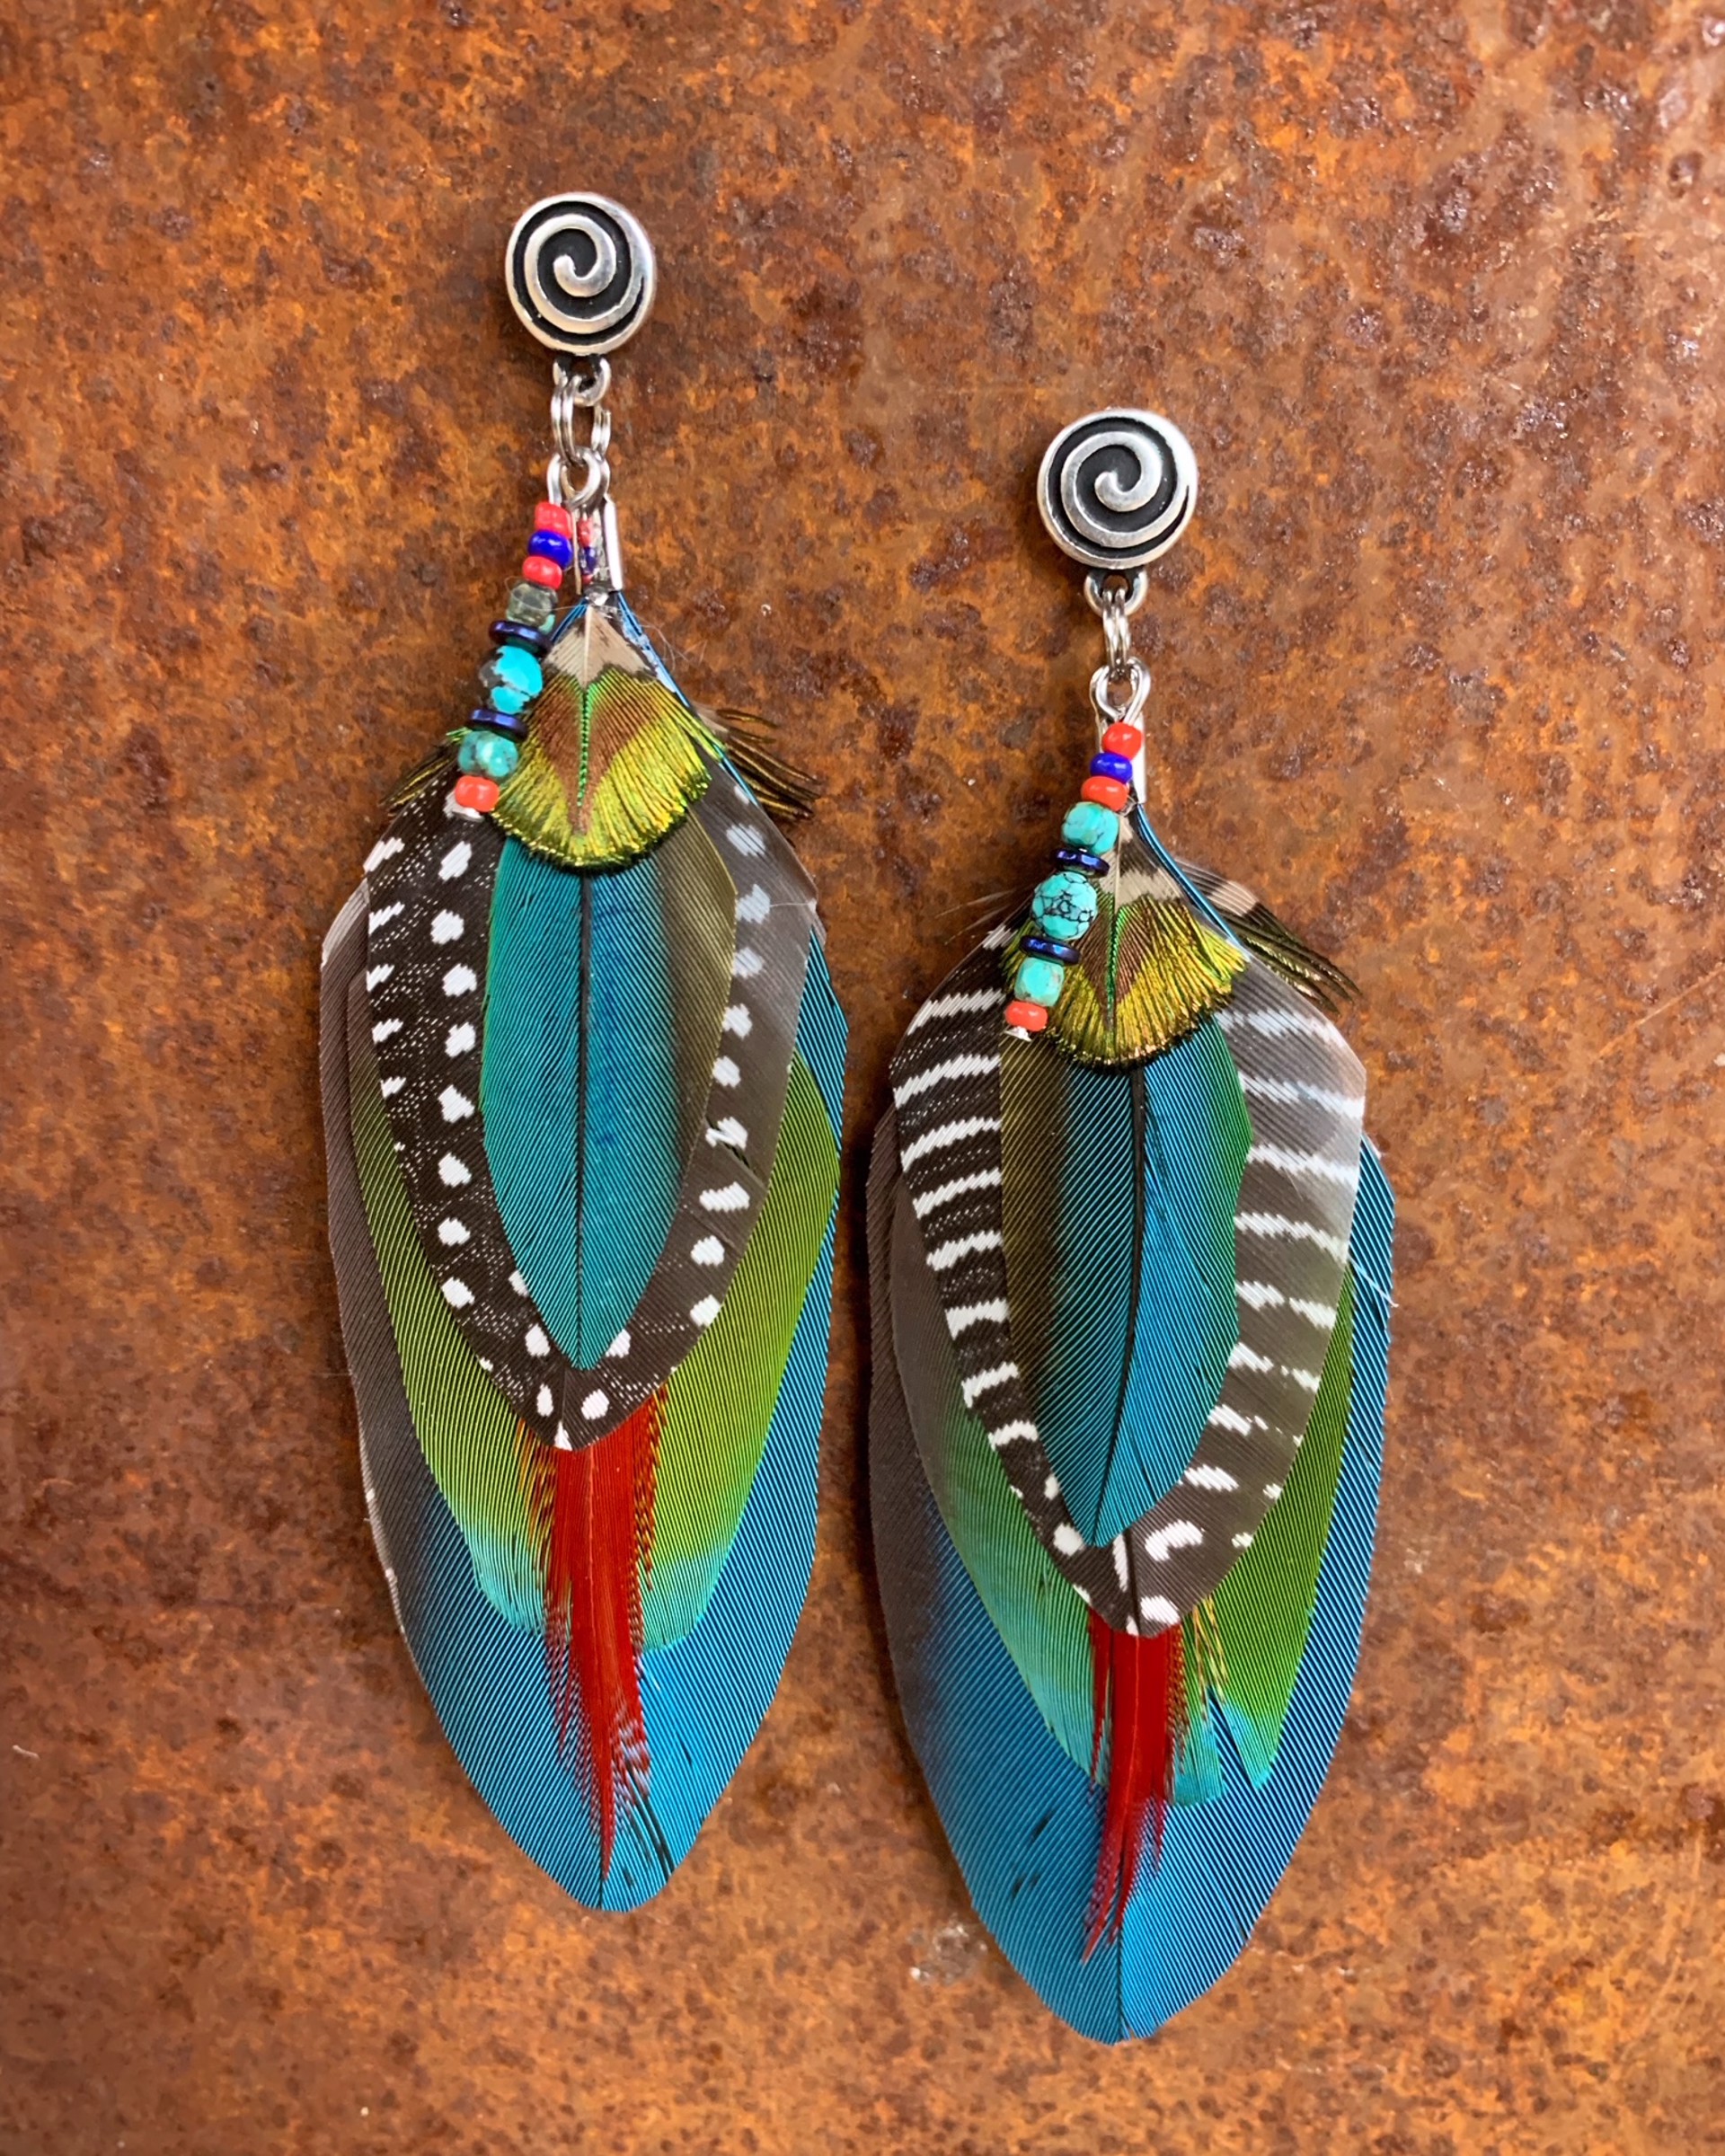 K809 Ethically Sourced Parrot Earrings by Kelly Ormsby